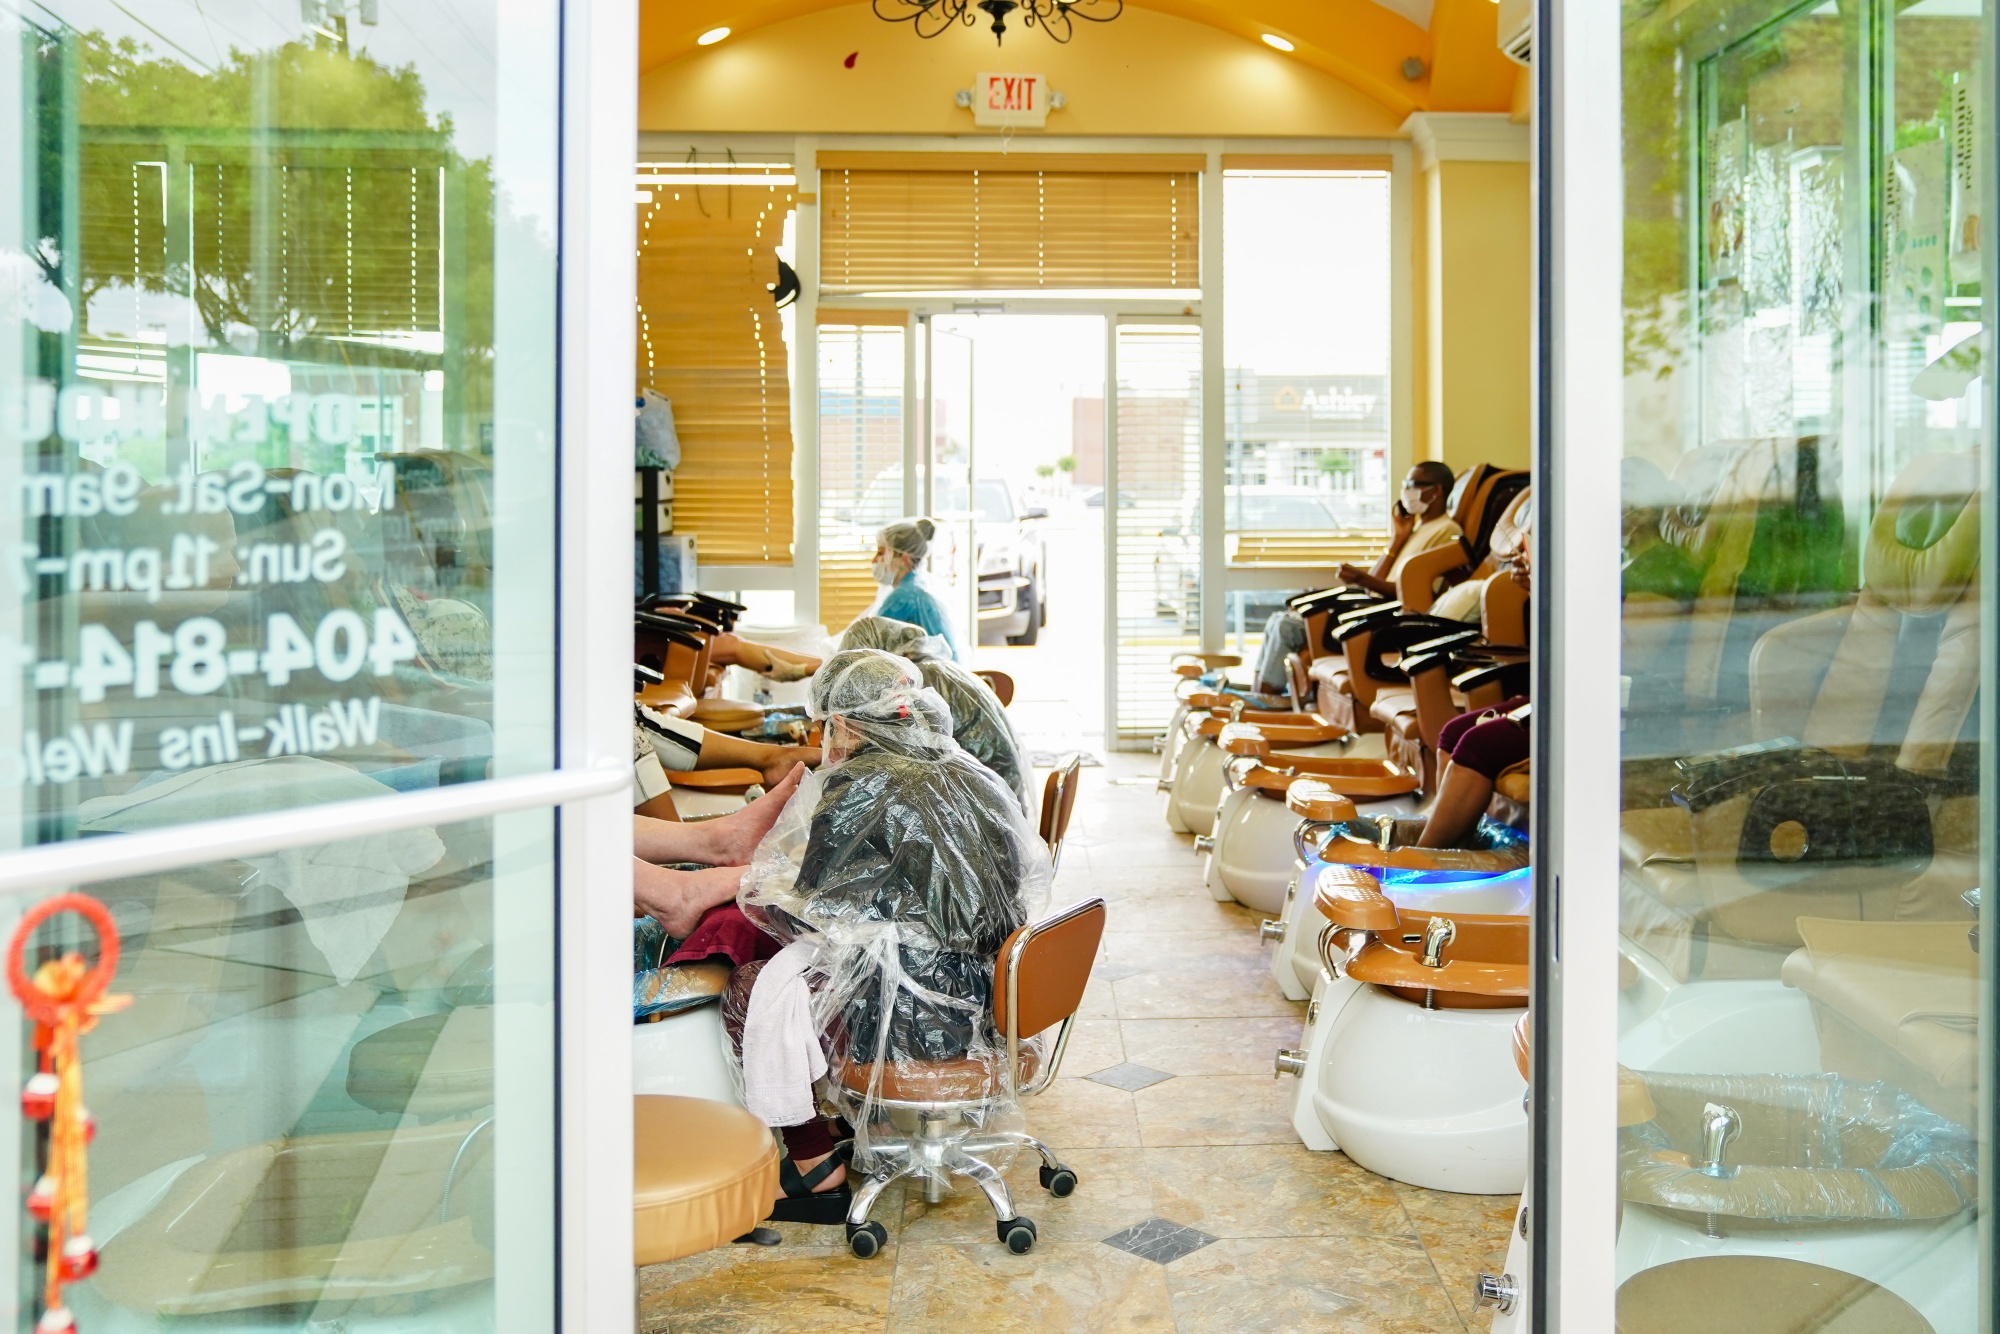 Workers wearing protective gear give customers pedicures at a newly reopened nail salon in Atlanta, Georgia,&nbsp;on&nbsp;April 24.